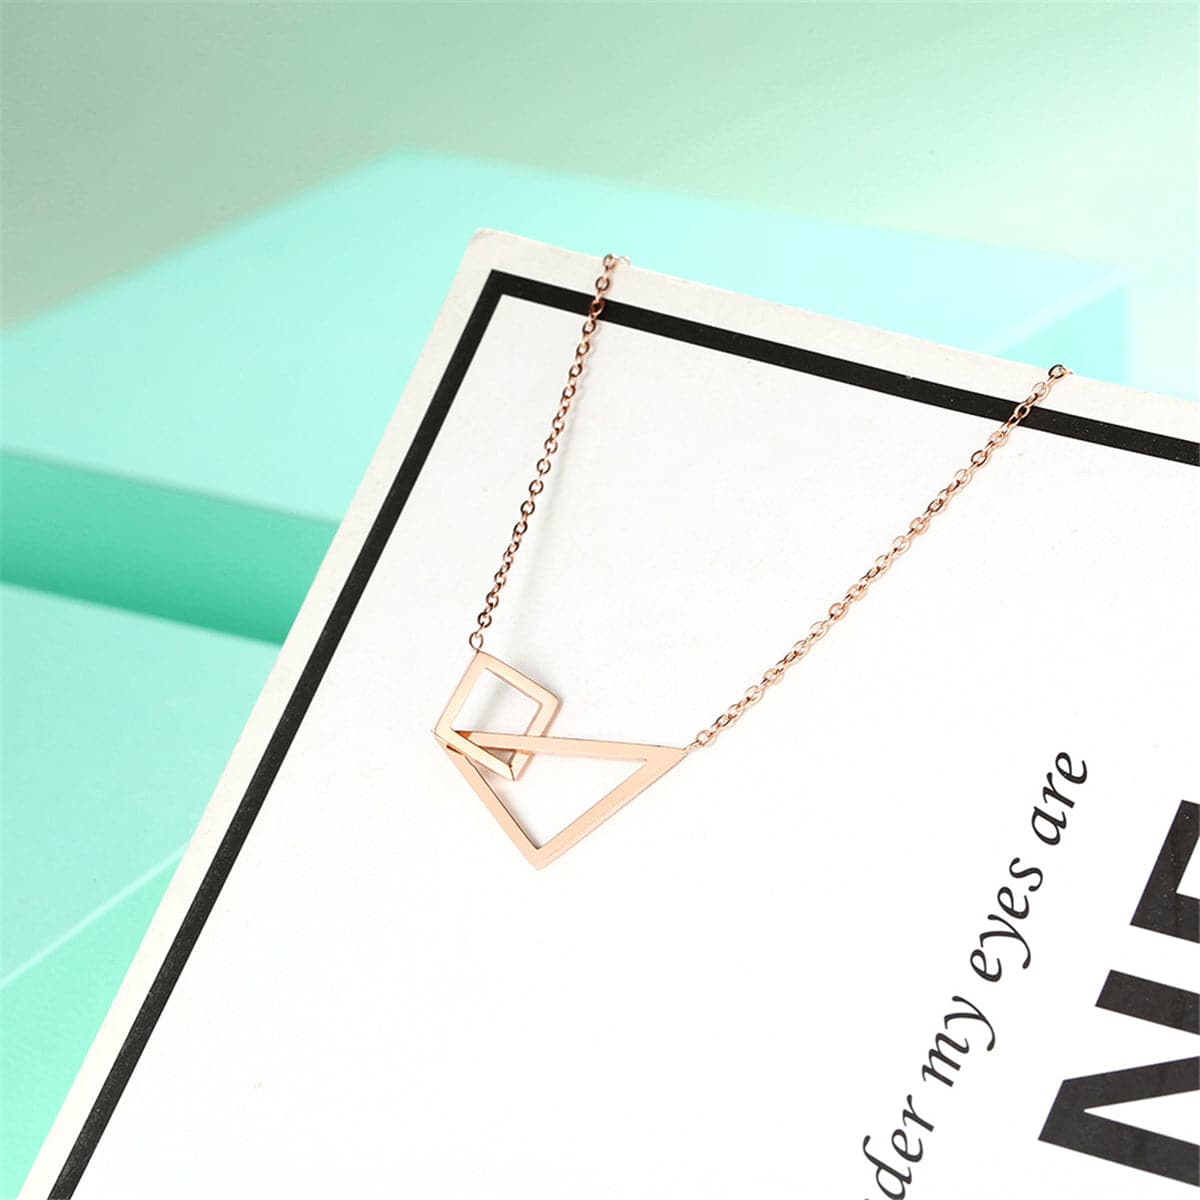 18K Rose Gold-Plated Crossing Open Triangle & Rhombus Pendant Necklace